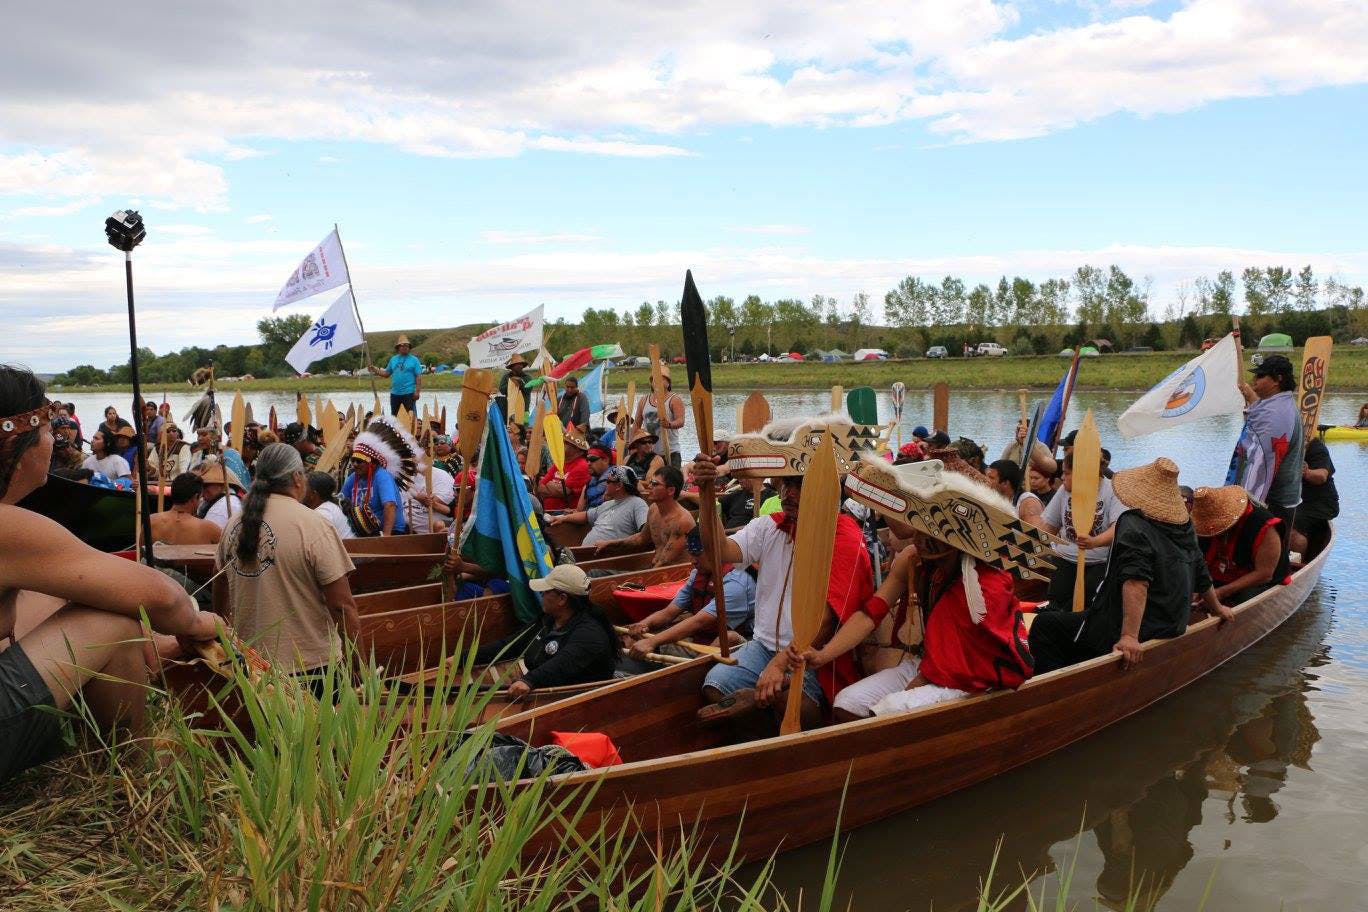 Indigenous activists, holding flags and oars, make a stirring entrance at Standing Rock as they arrive in a line of canoes.